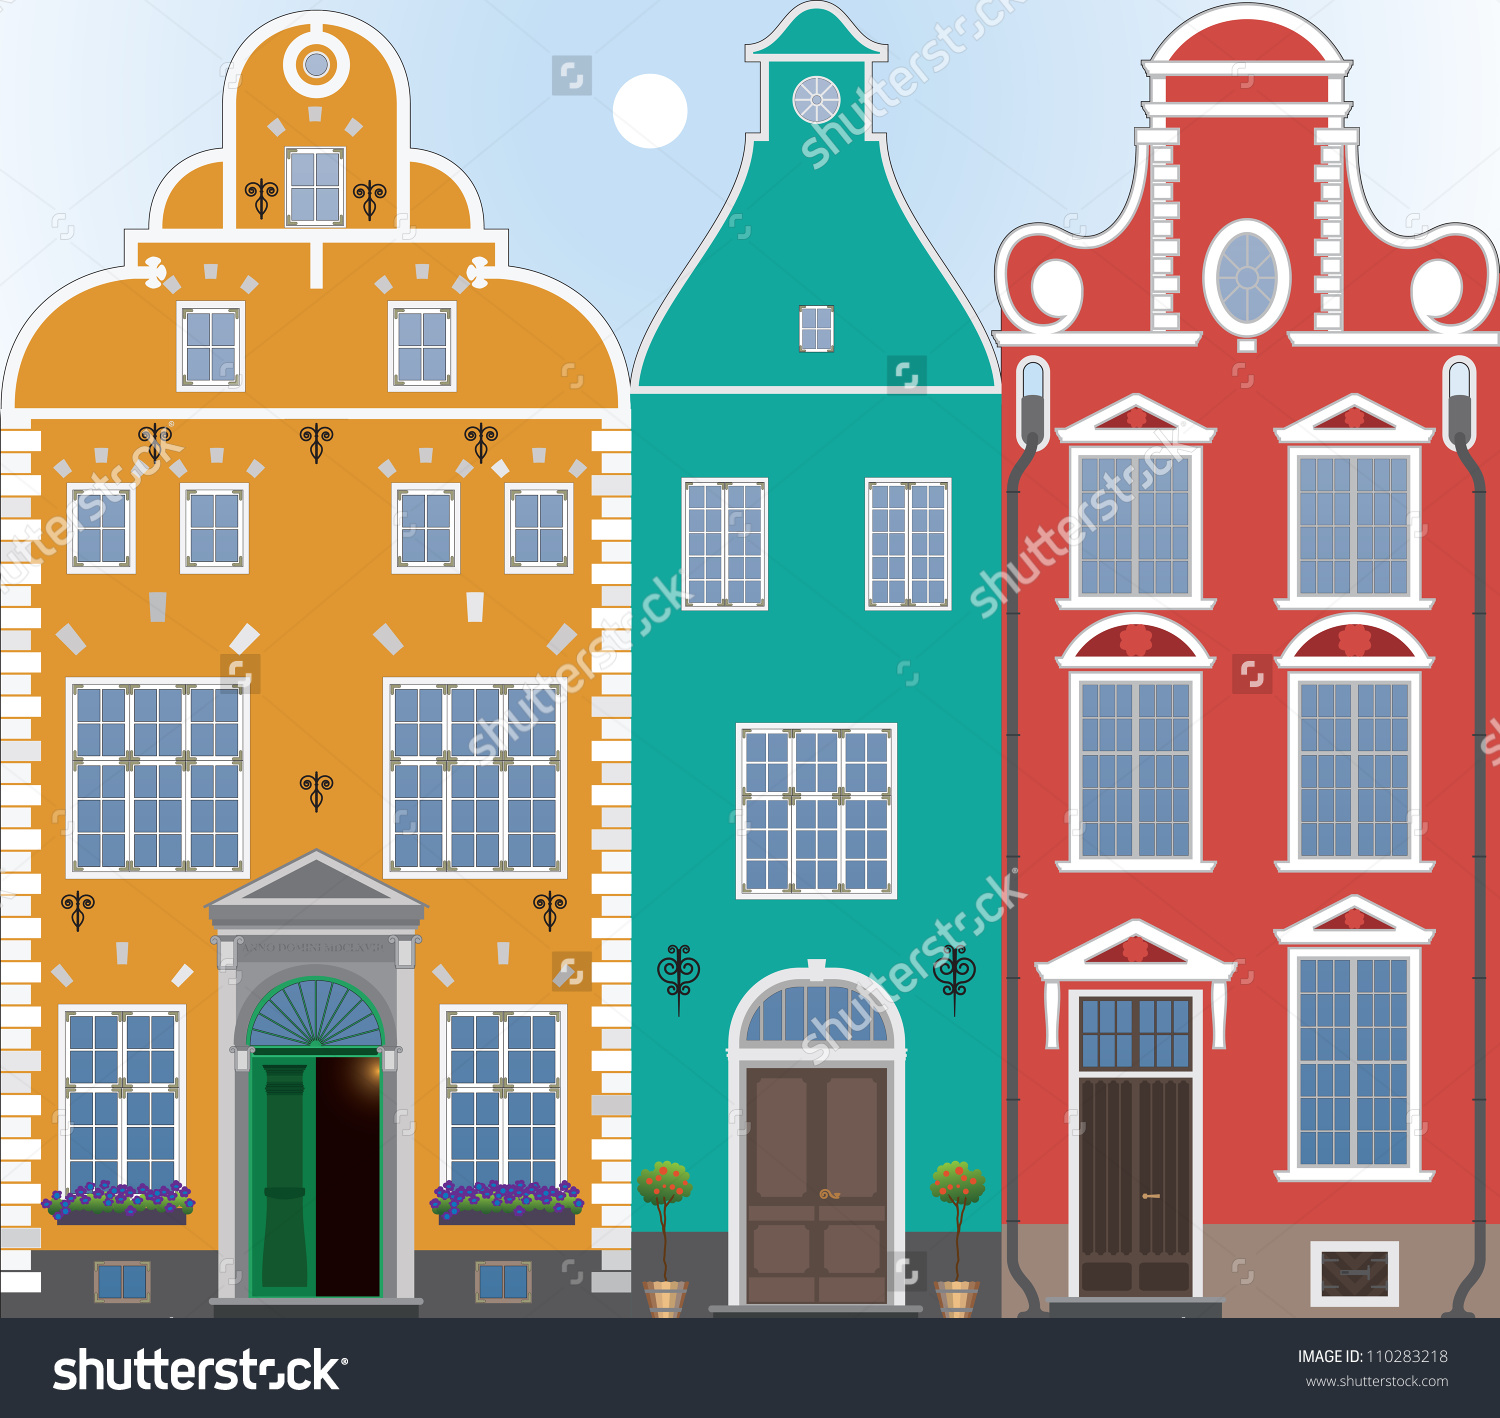 Burgher's house clipart - Clipground